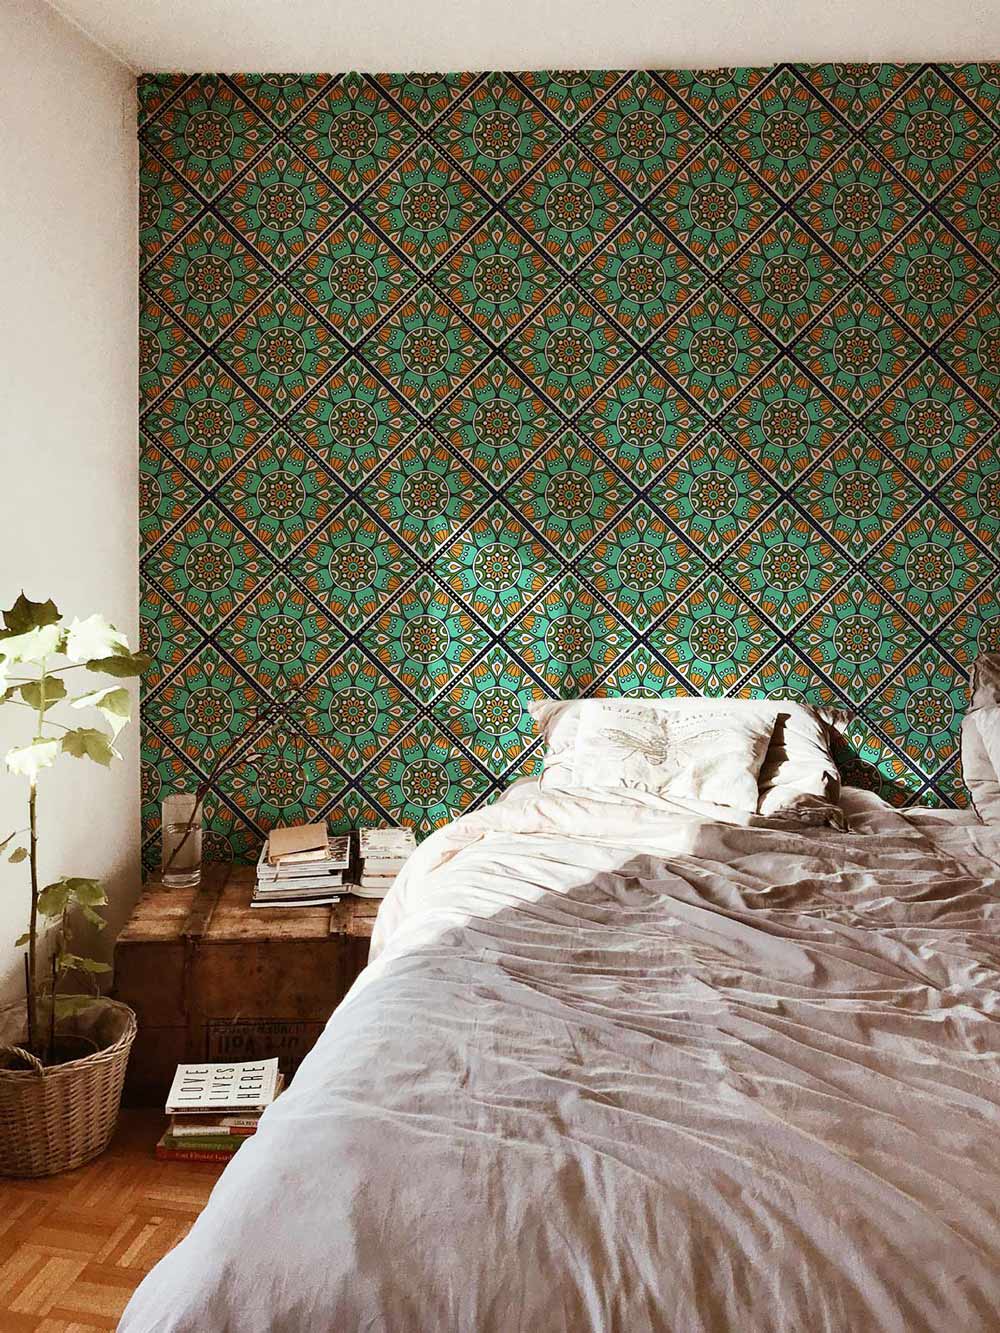 wallpaper in the form of a rotating floral design for the bedroom